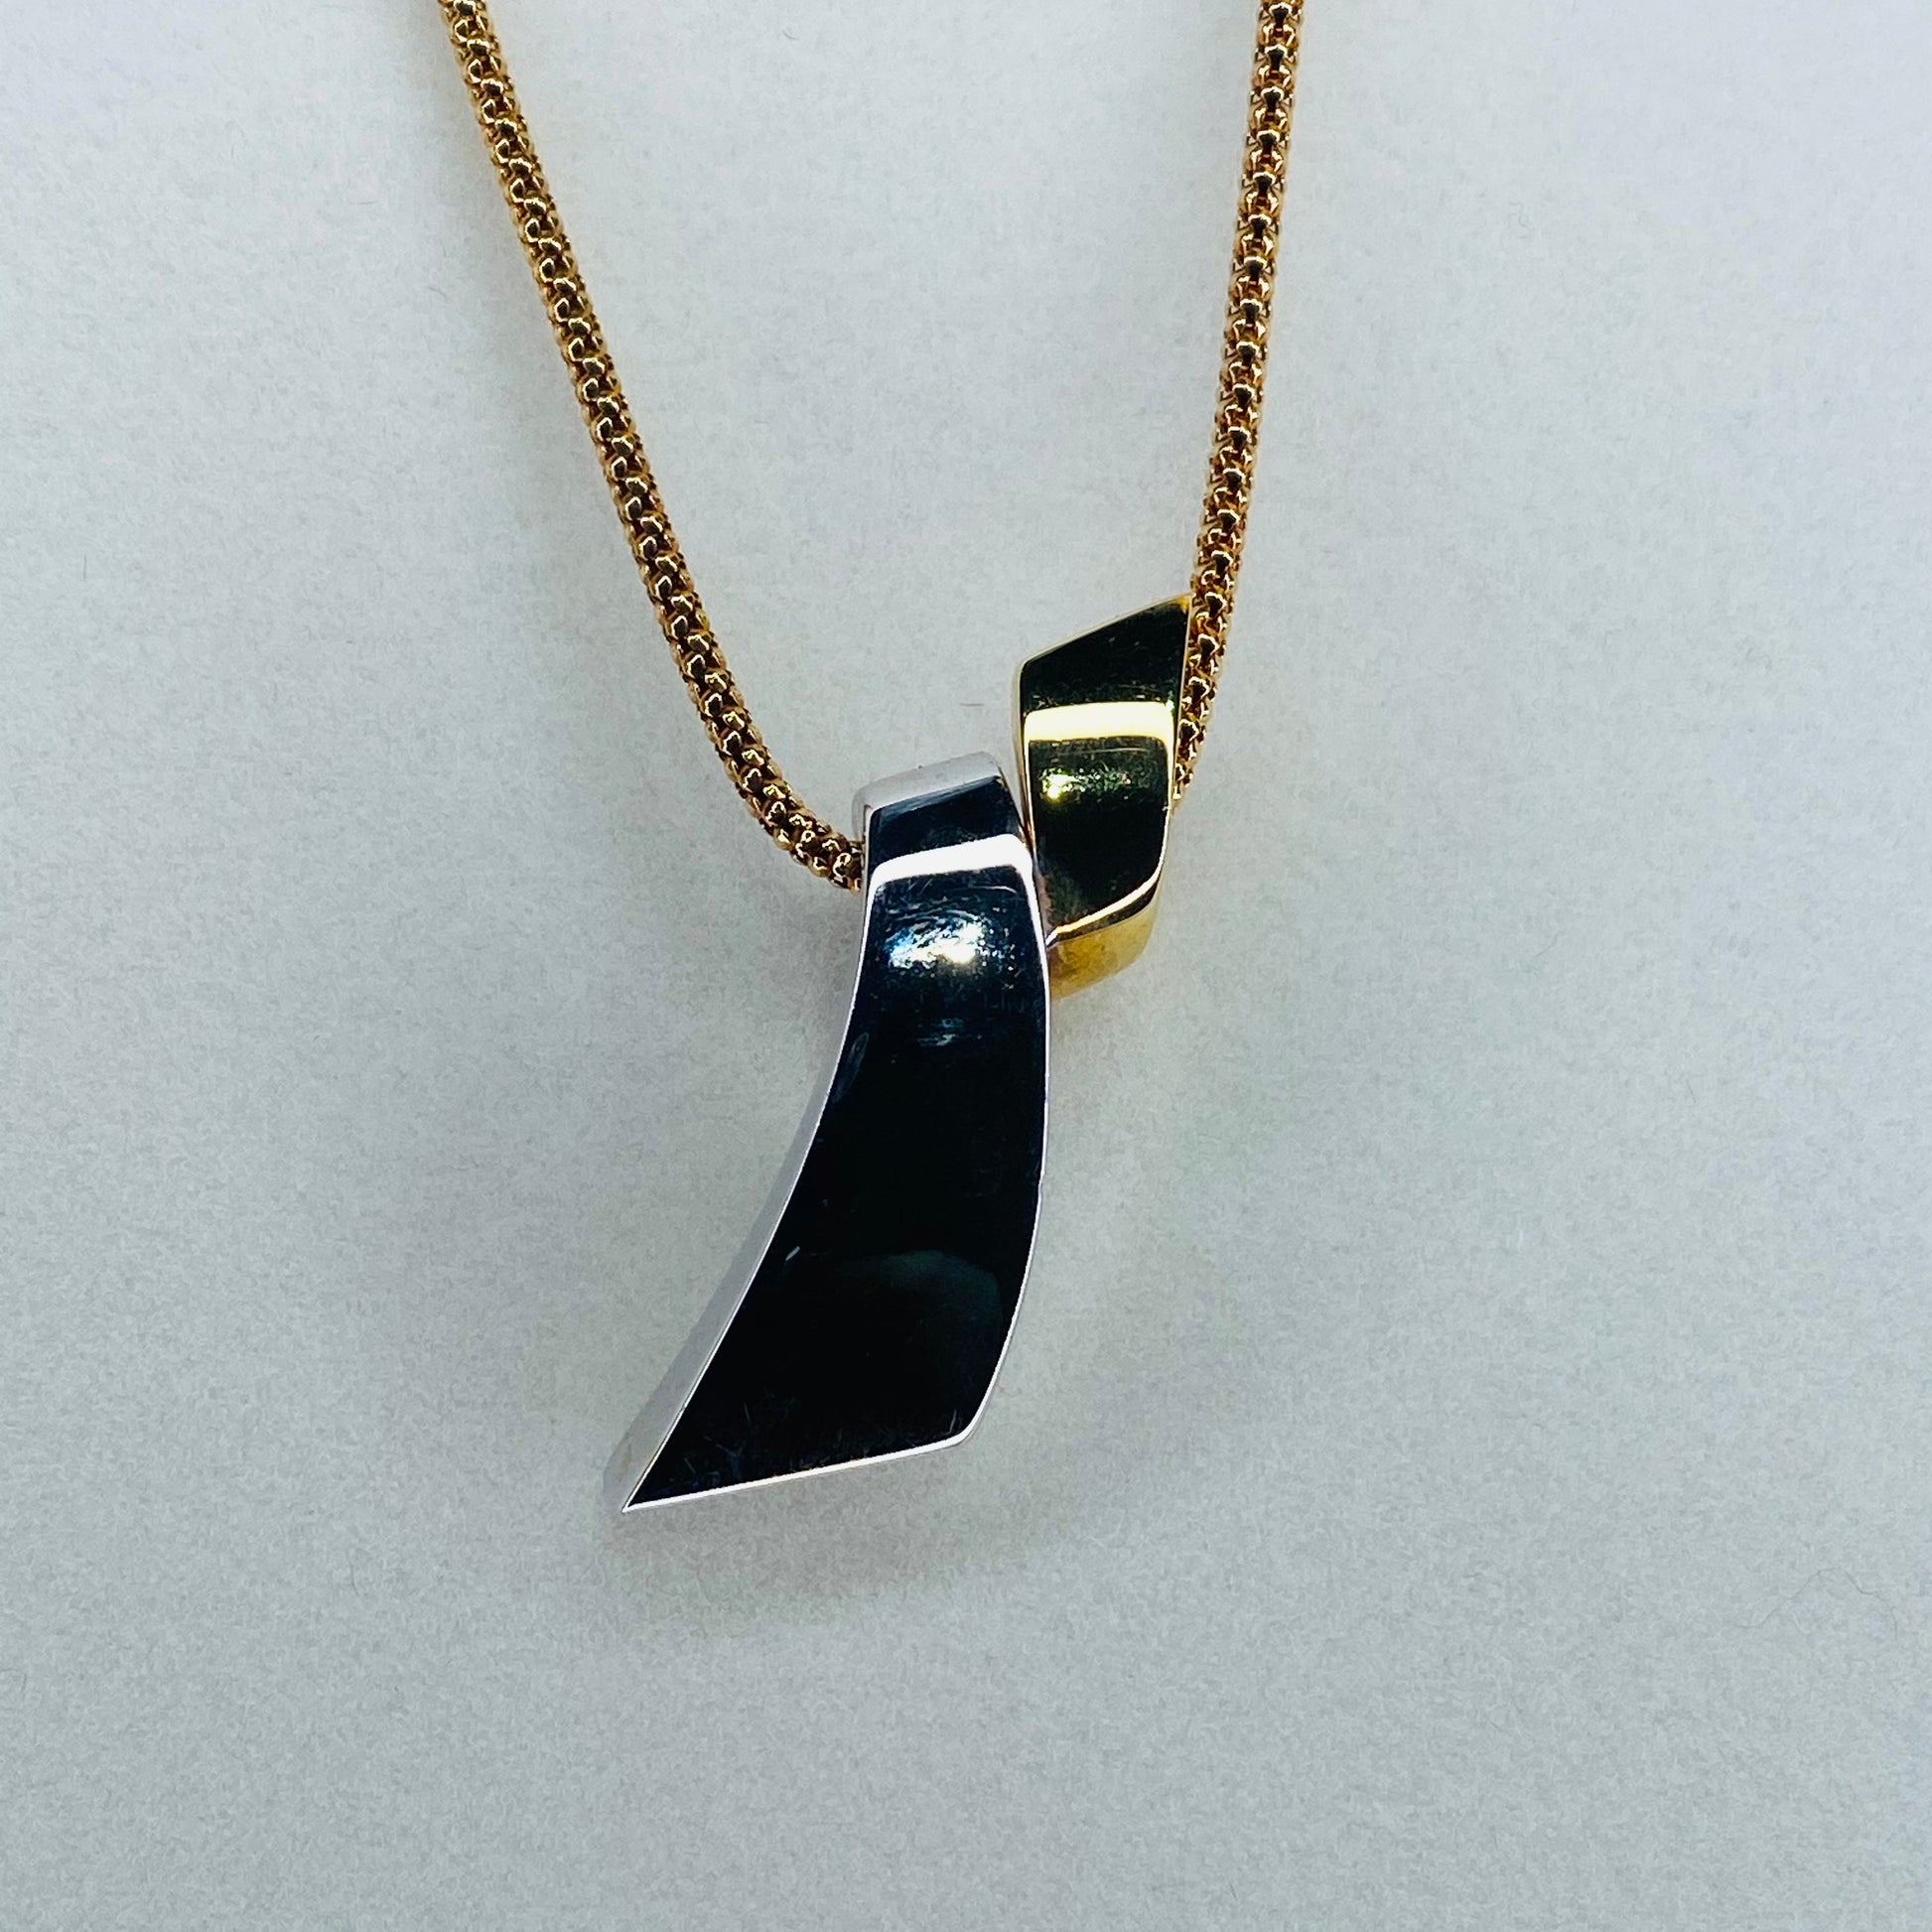 18ct Gold Two Tone Pendant Necklace - John Ross Jewellers